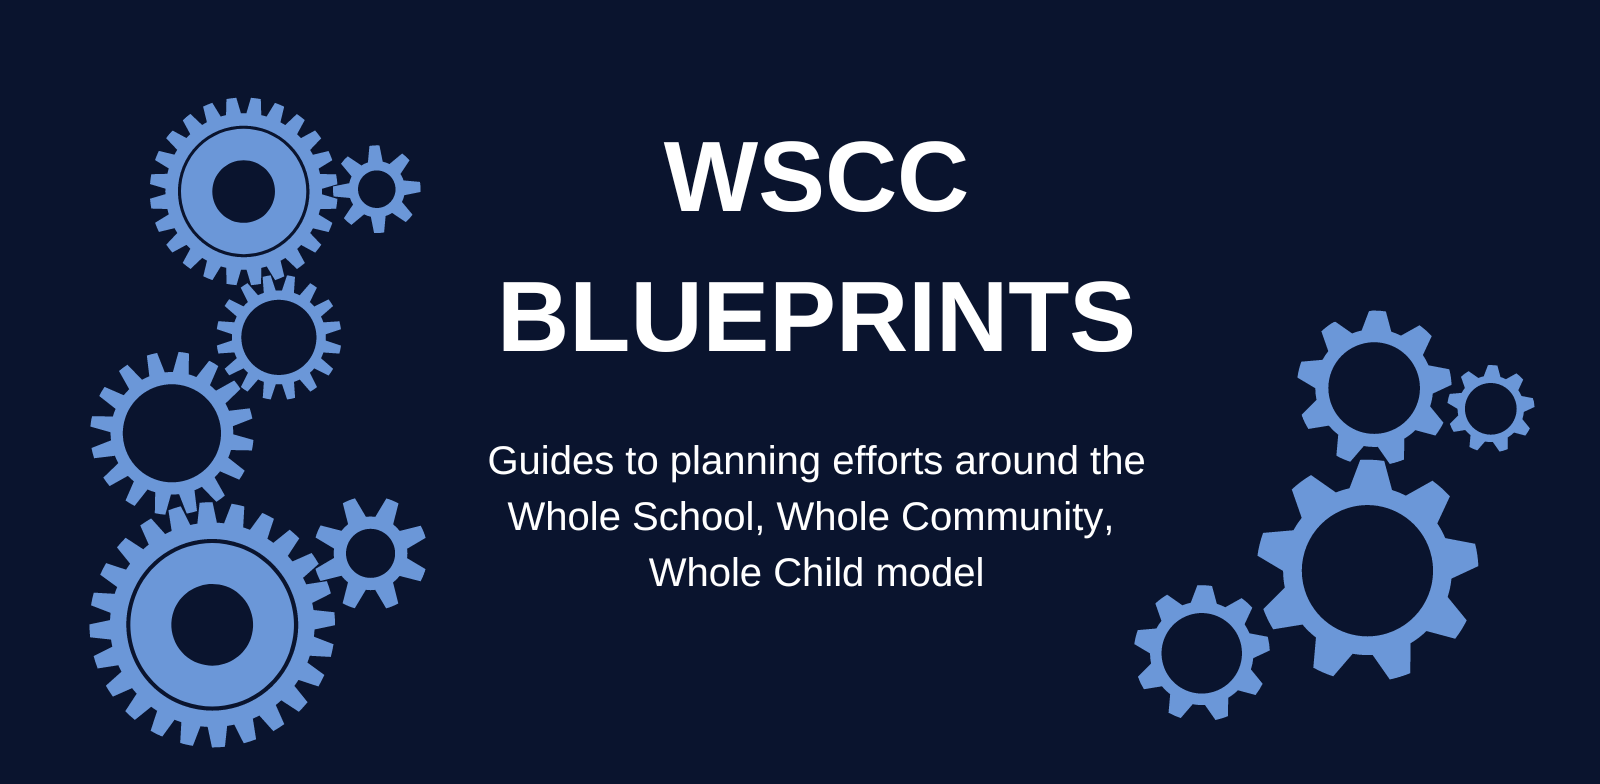 WSCC Blueprints Guides to planning efforts around the Whole School, Whole Community,  Whole Child model